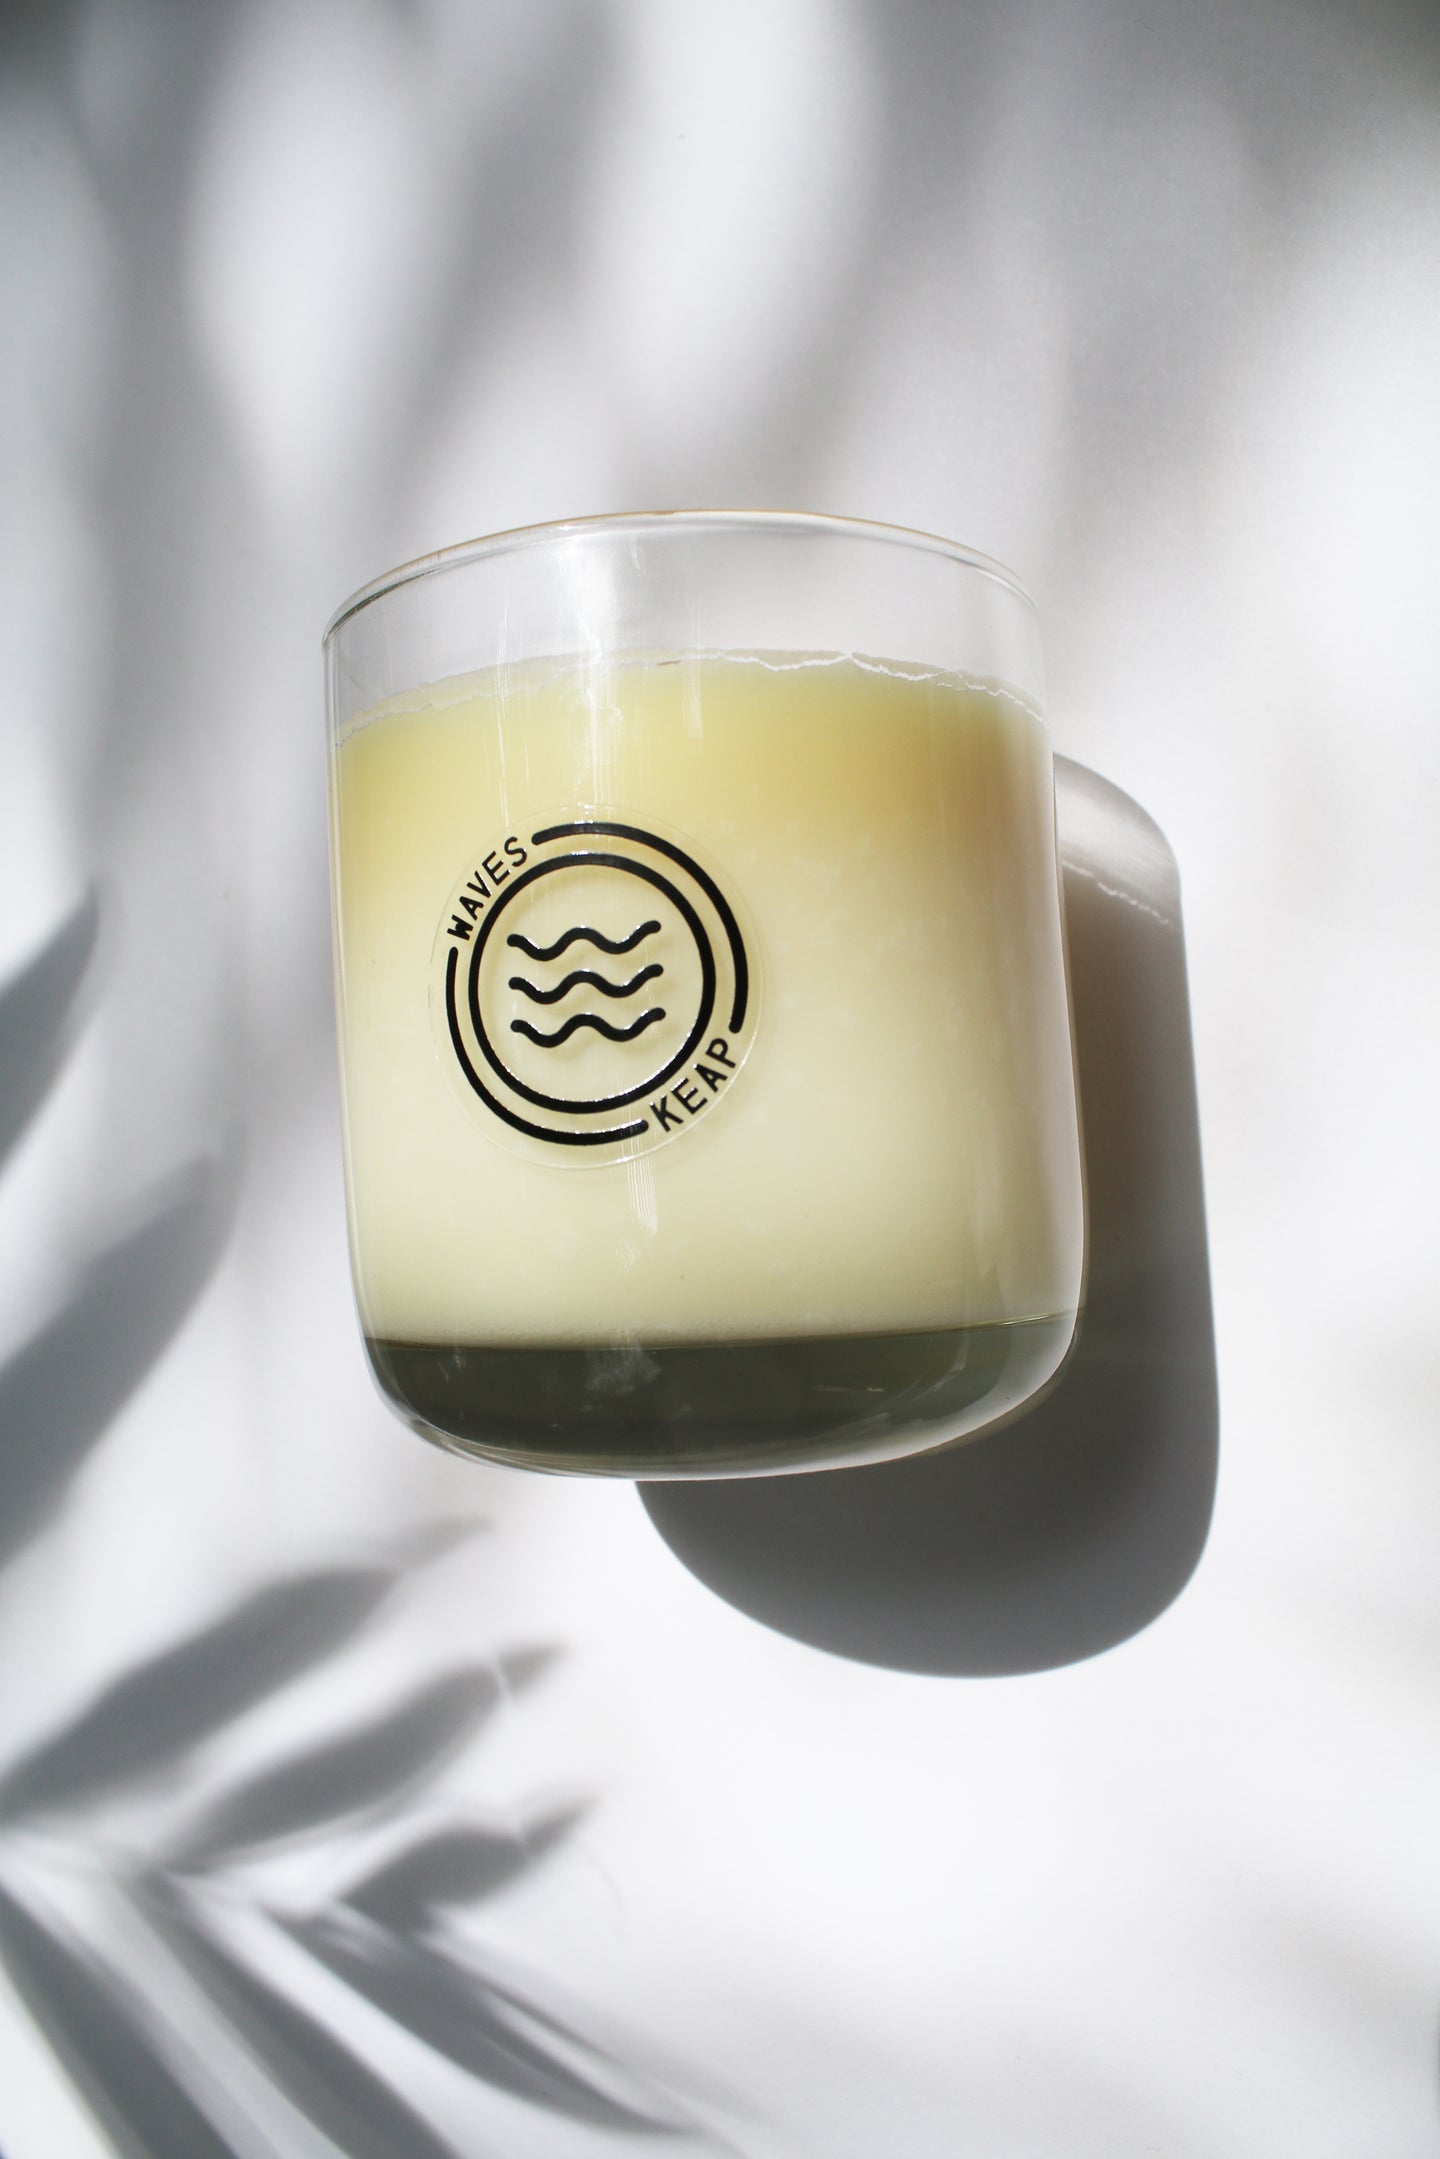 an up close video of a candle - the candle wax is a white color and is inside a clear glass container that doubles as a drinking tumbler once the candle burns out.